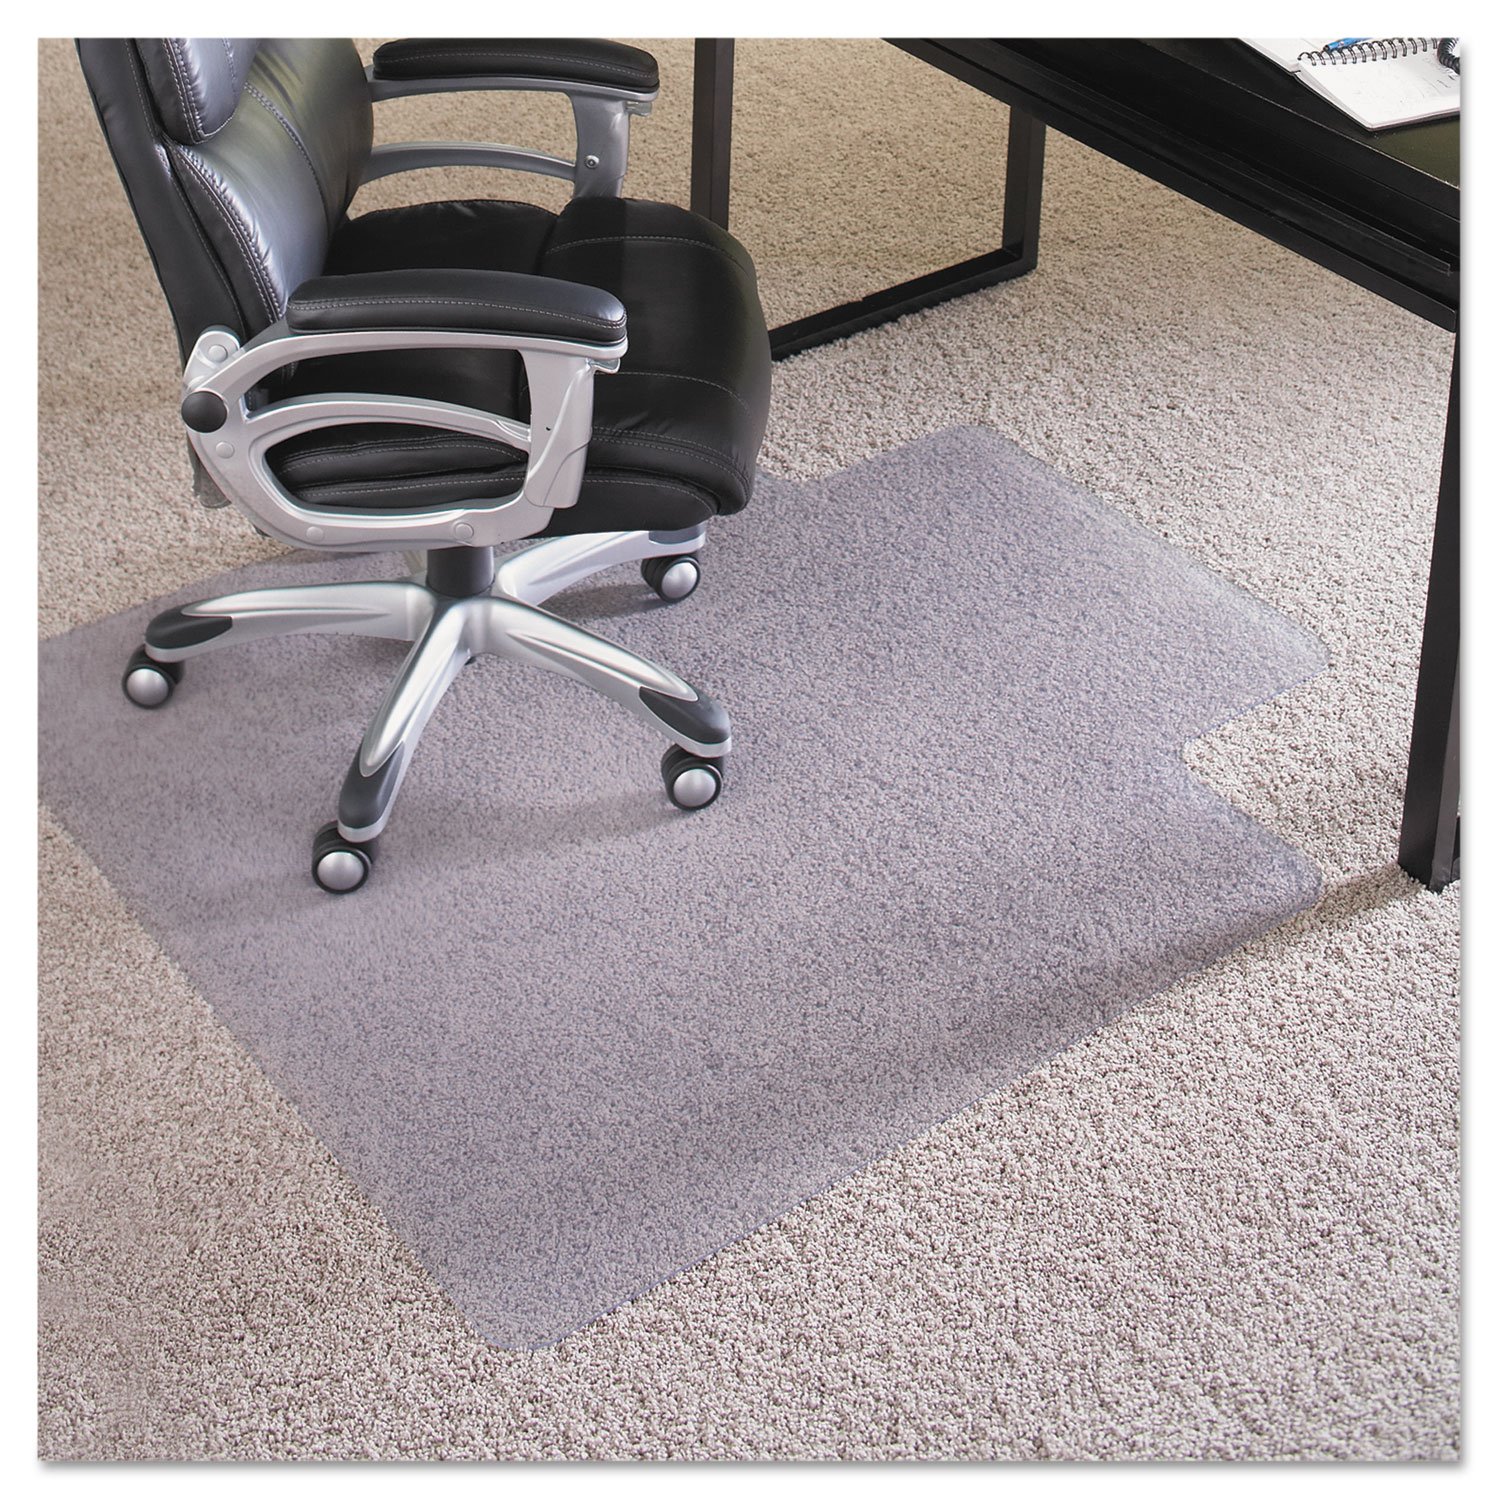 36x48 Lip Chair Mat, Performance Series AnchorBar for Carpet up to 1